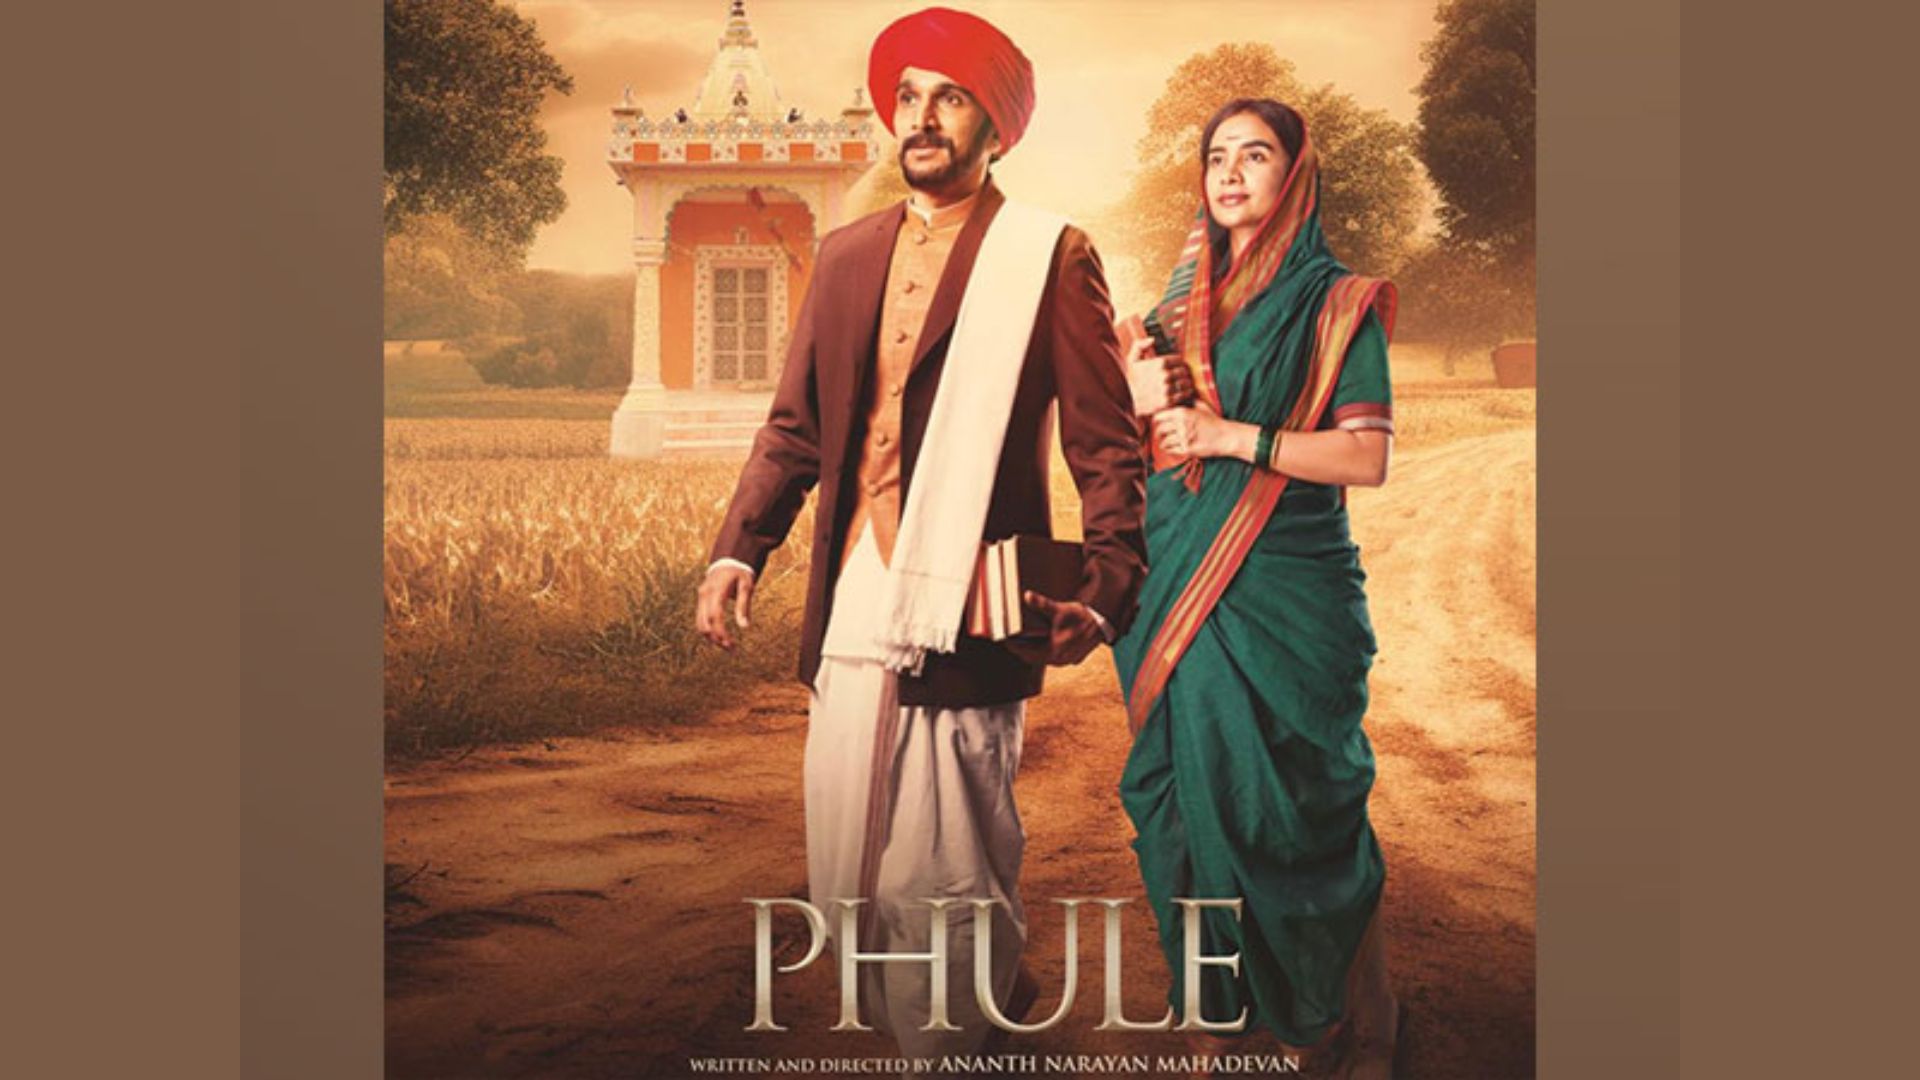 New Poster of ‘Phule’ film unveiled on social reformer Jyotirao Phule’s birth anniversary